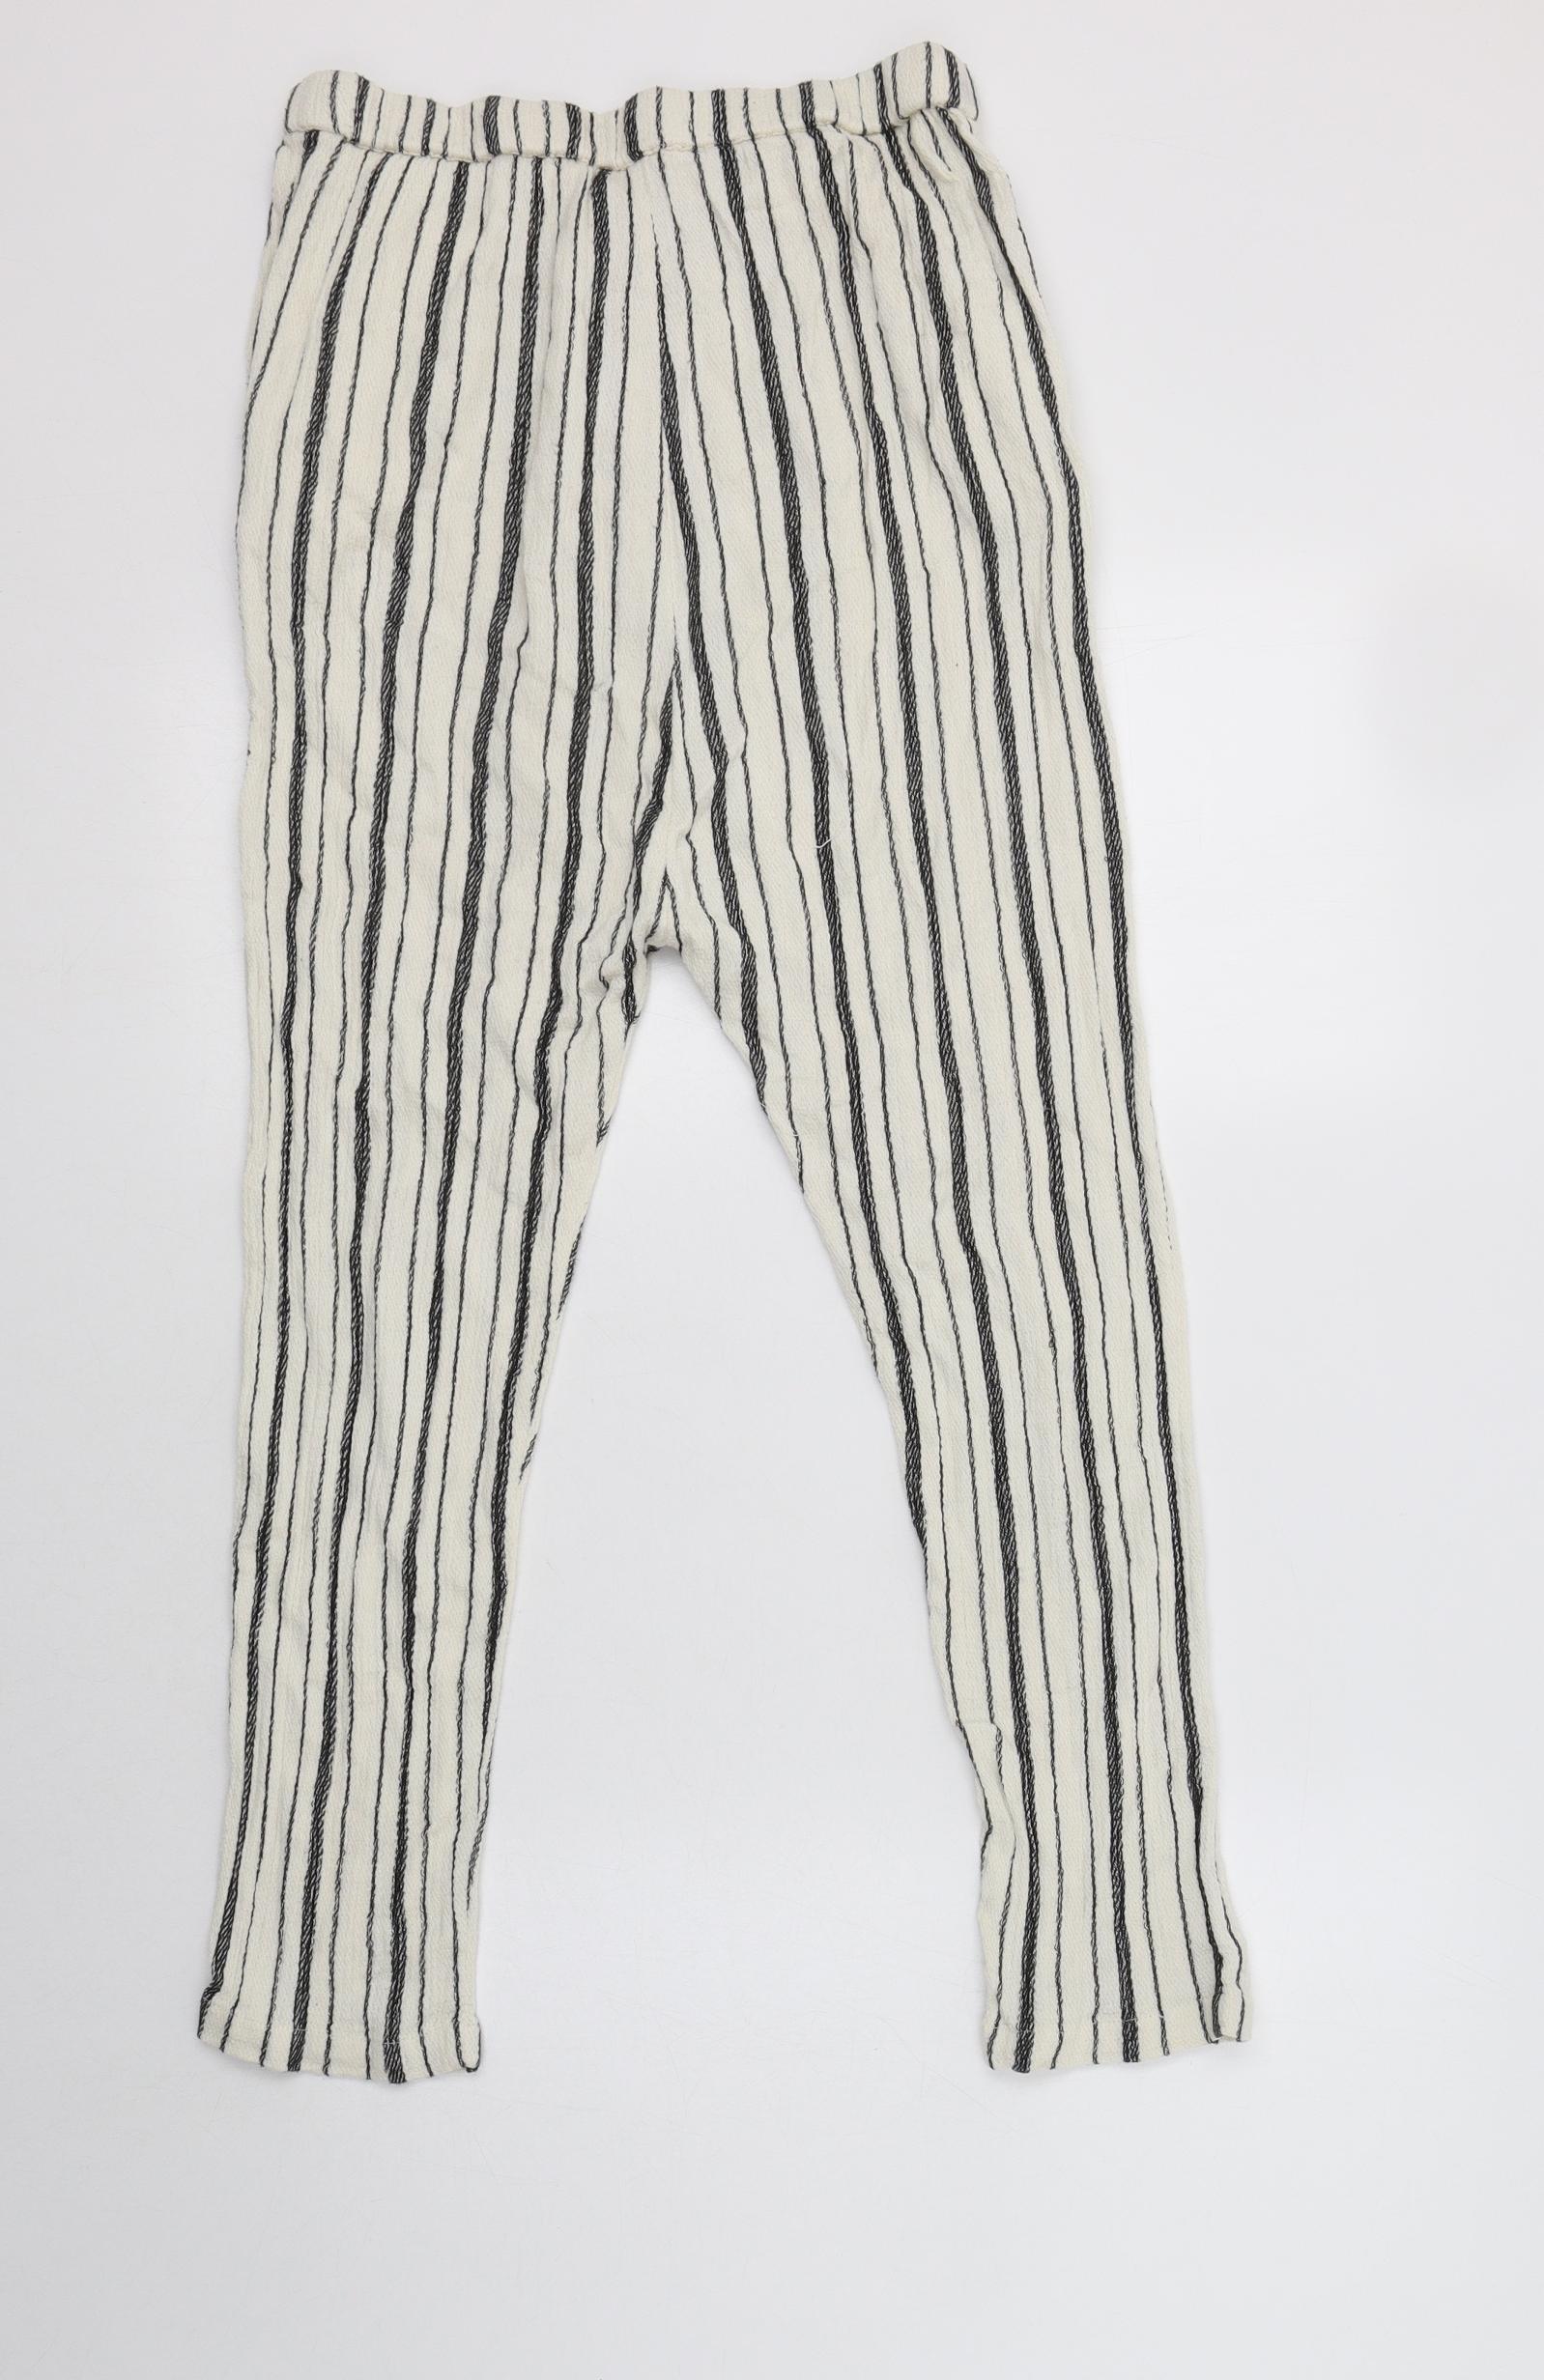 Zara Striped Pants With Tie Belt  Leggings Do Not Count as Pants Why I  Cant Get Behind the Trend  POPSUGAR Fashion Photo 10